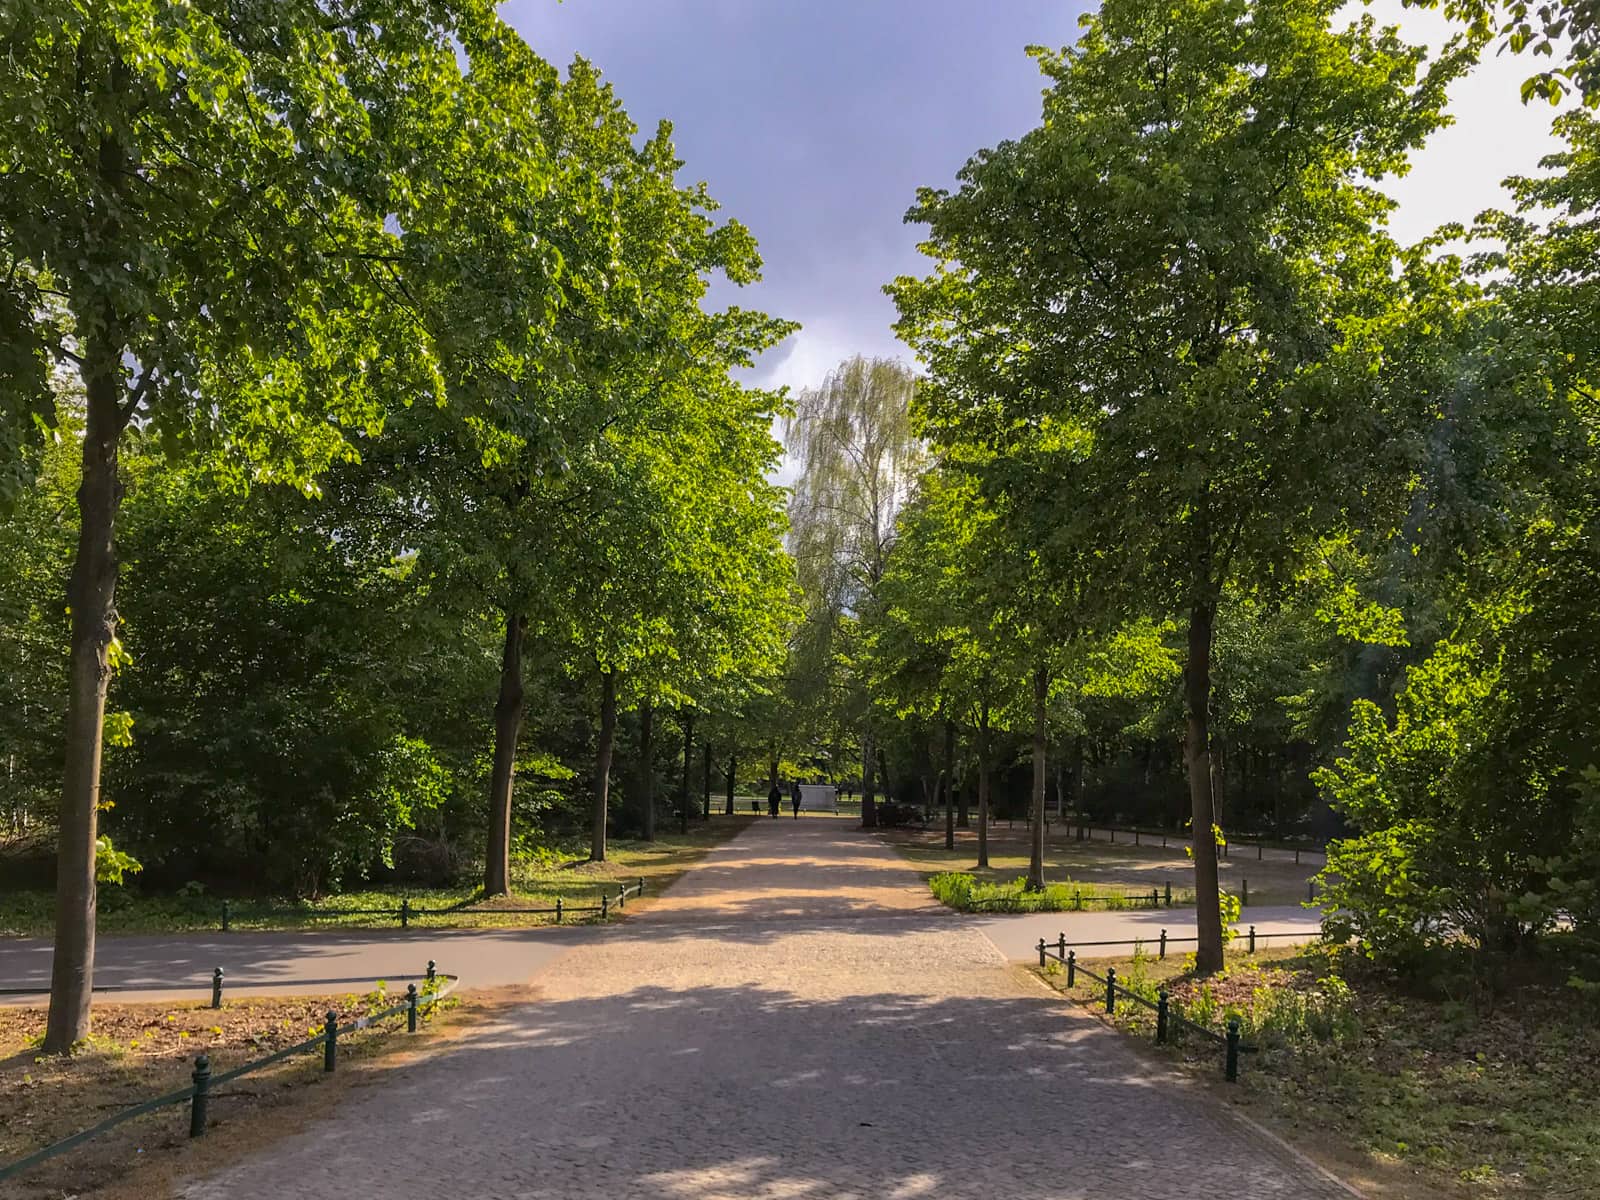 The inside of a park showing the path leading forward but with a path going from left to right. There are many trees making the park resemble a forest